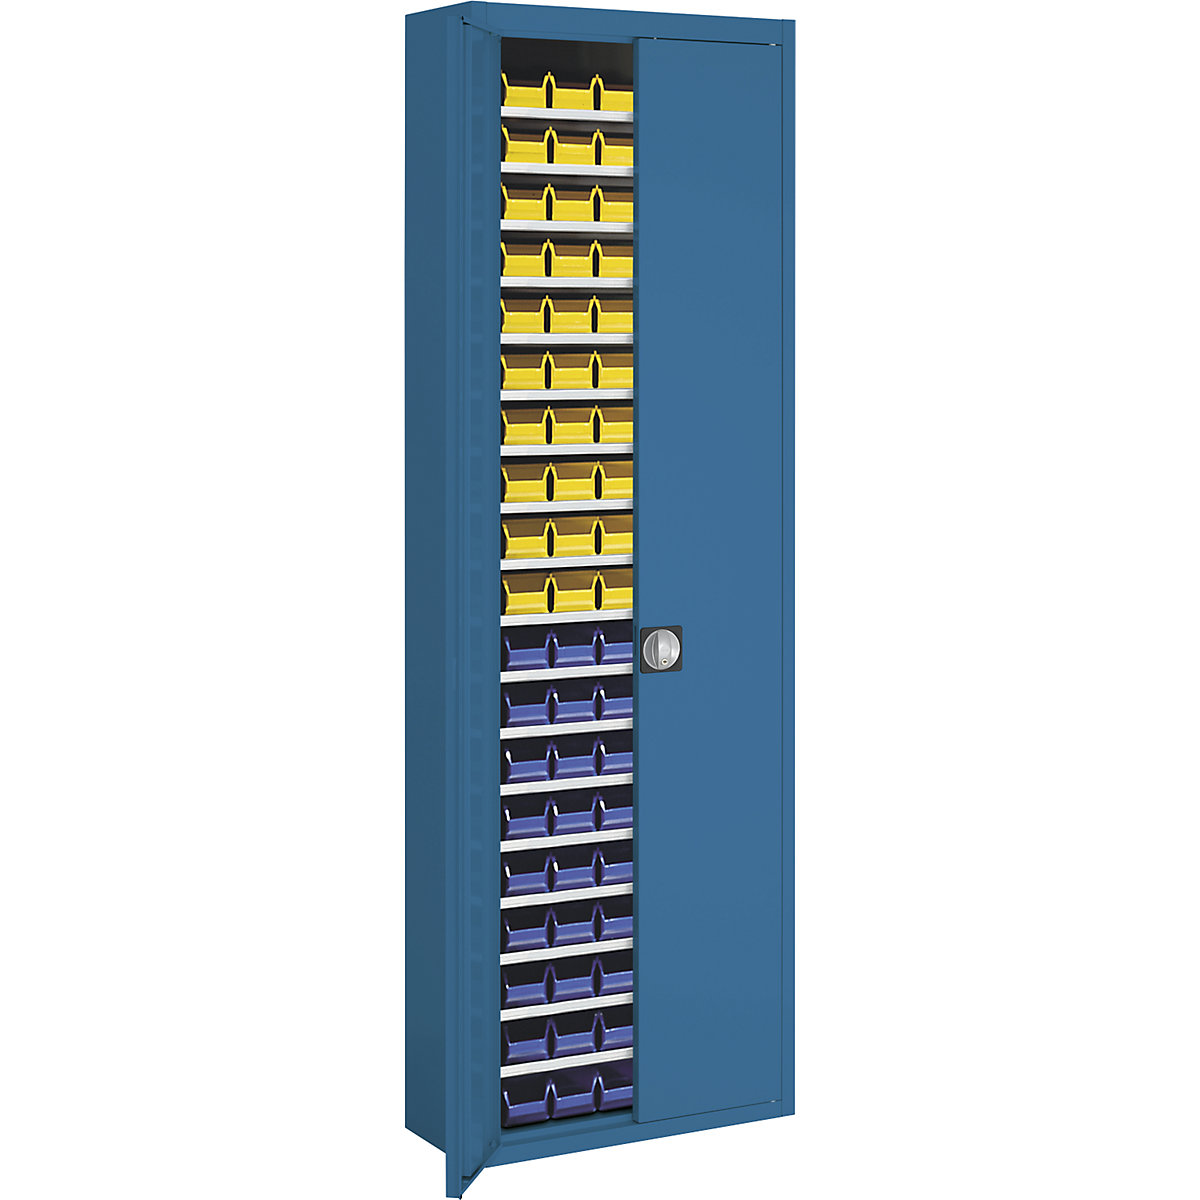 Storage cupboard with open fronted storage bins – mauser, HxWxD 2150 x 680 x 280 mm, two-colour, grey body, blue doors, 114 bins-7